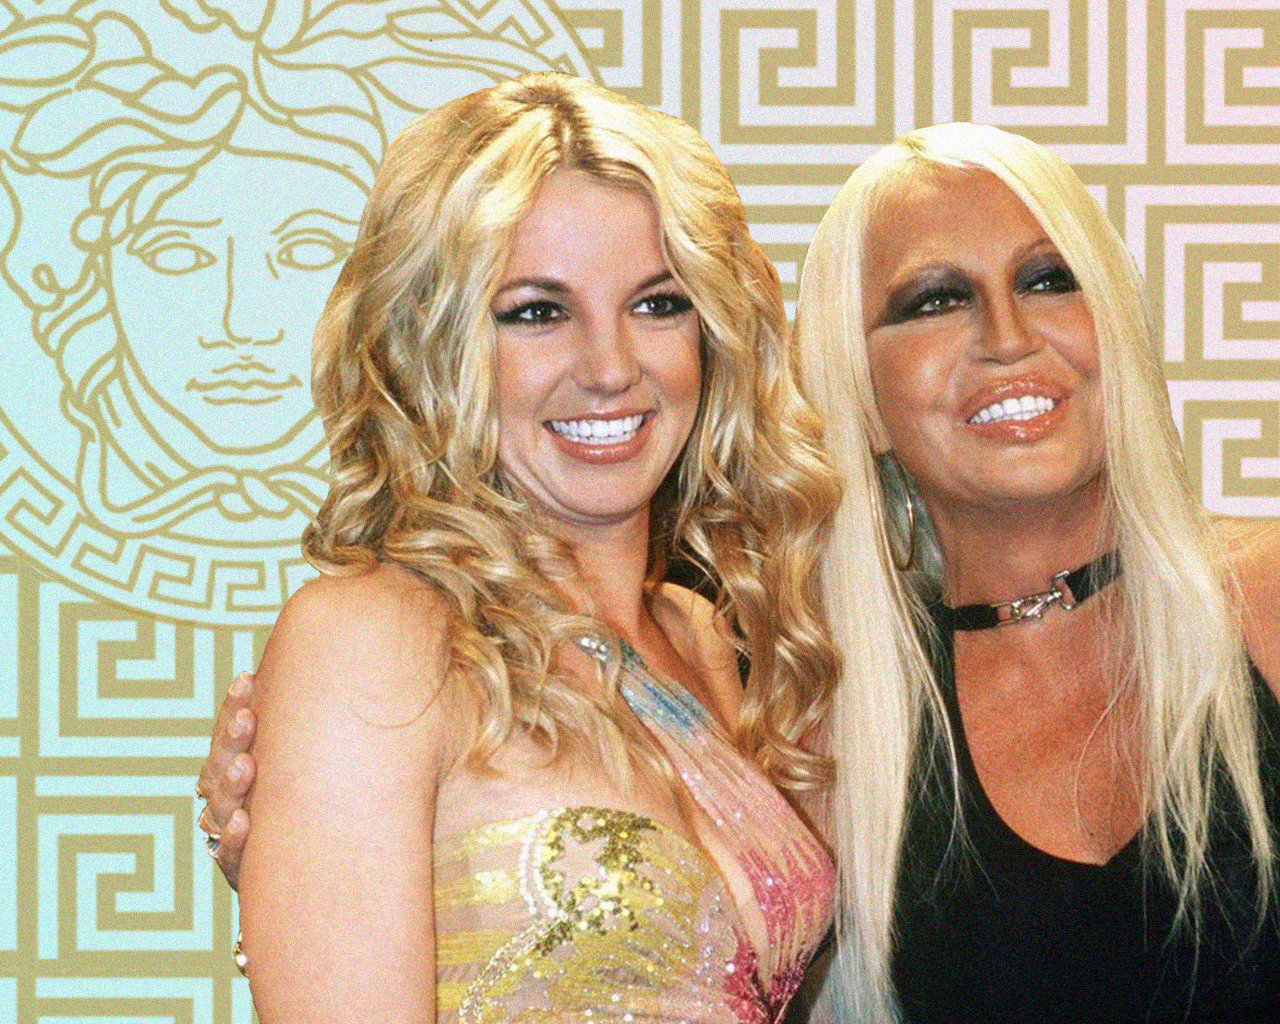 Donatella Versace Recalls Britney Spears Being So Liberated and